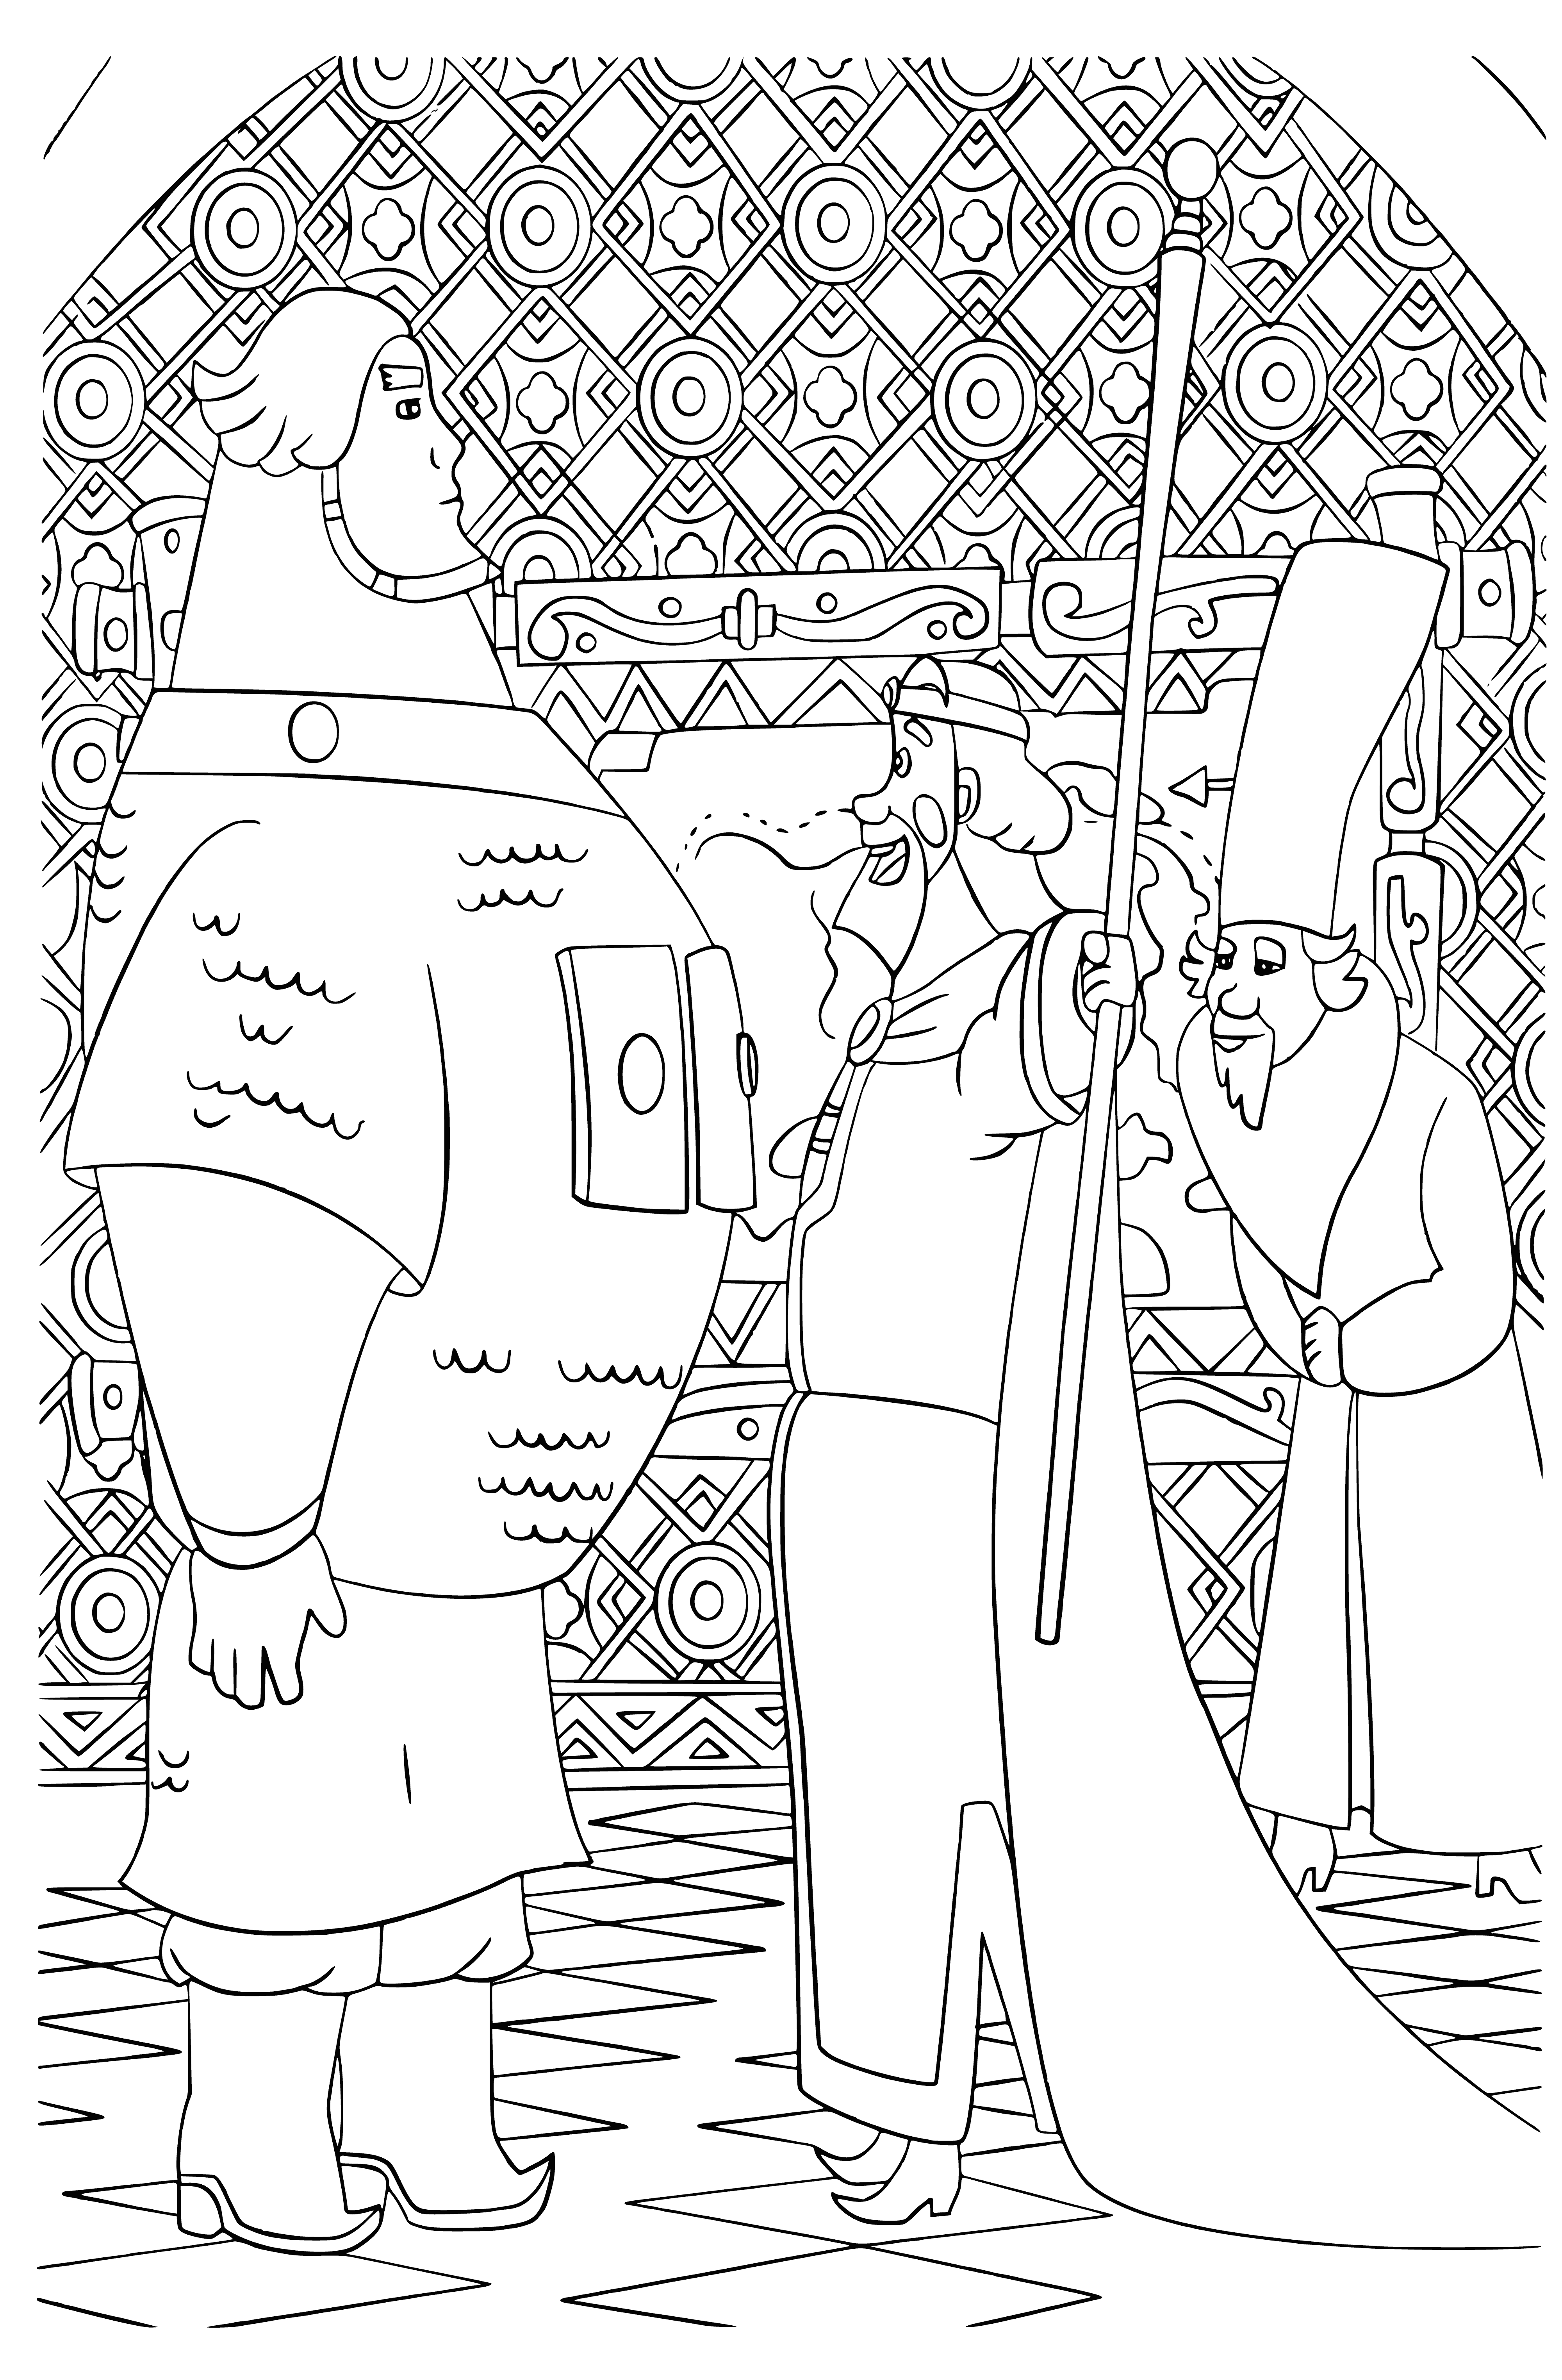 coloring page: In the prince's chambers, a bed w/ canopy, basin, pitcher, rug, fireplace, & tapestry of a prince on a horse fighting a dragon.